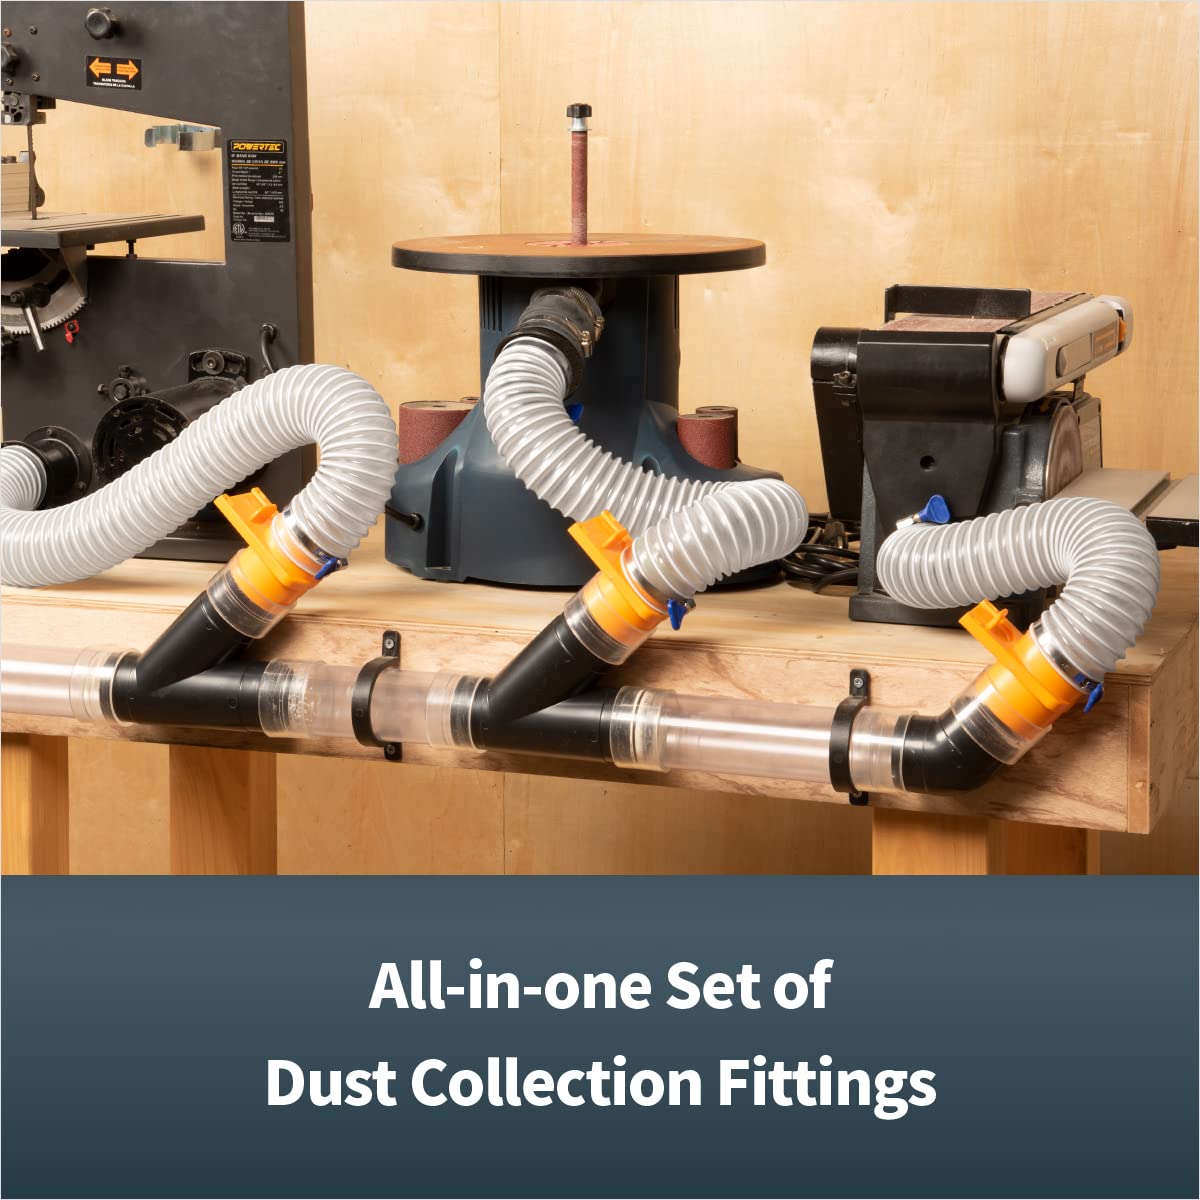 POWERTEC 70315 2-1/2-Inch Dust Collection Fittings Kit w/Connectors, Blast Gates and Clamps – Three Machine Set-Up